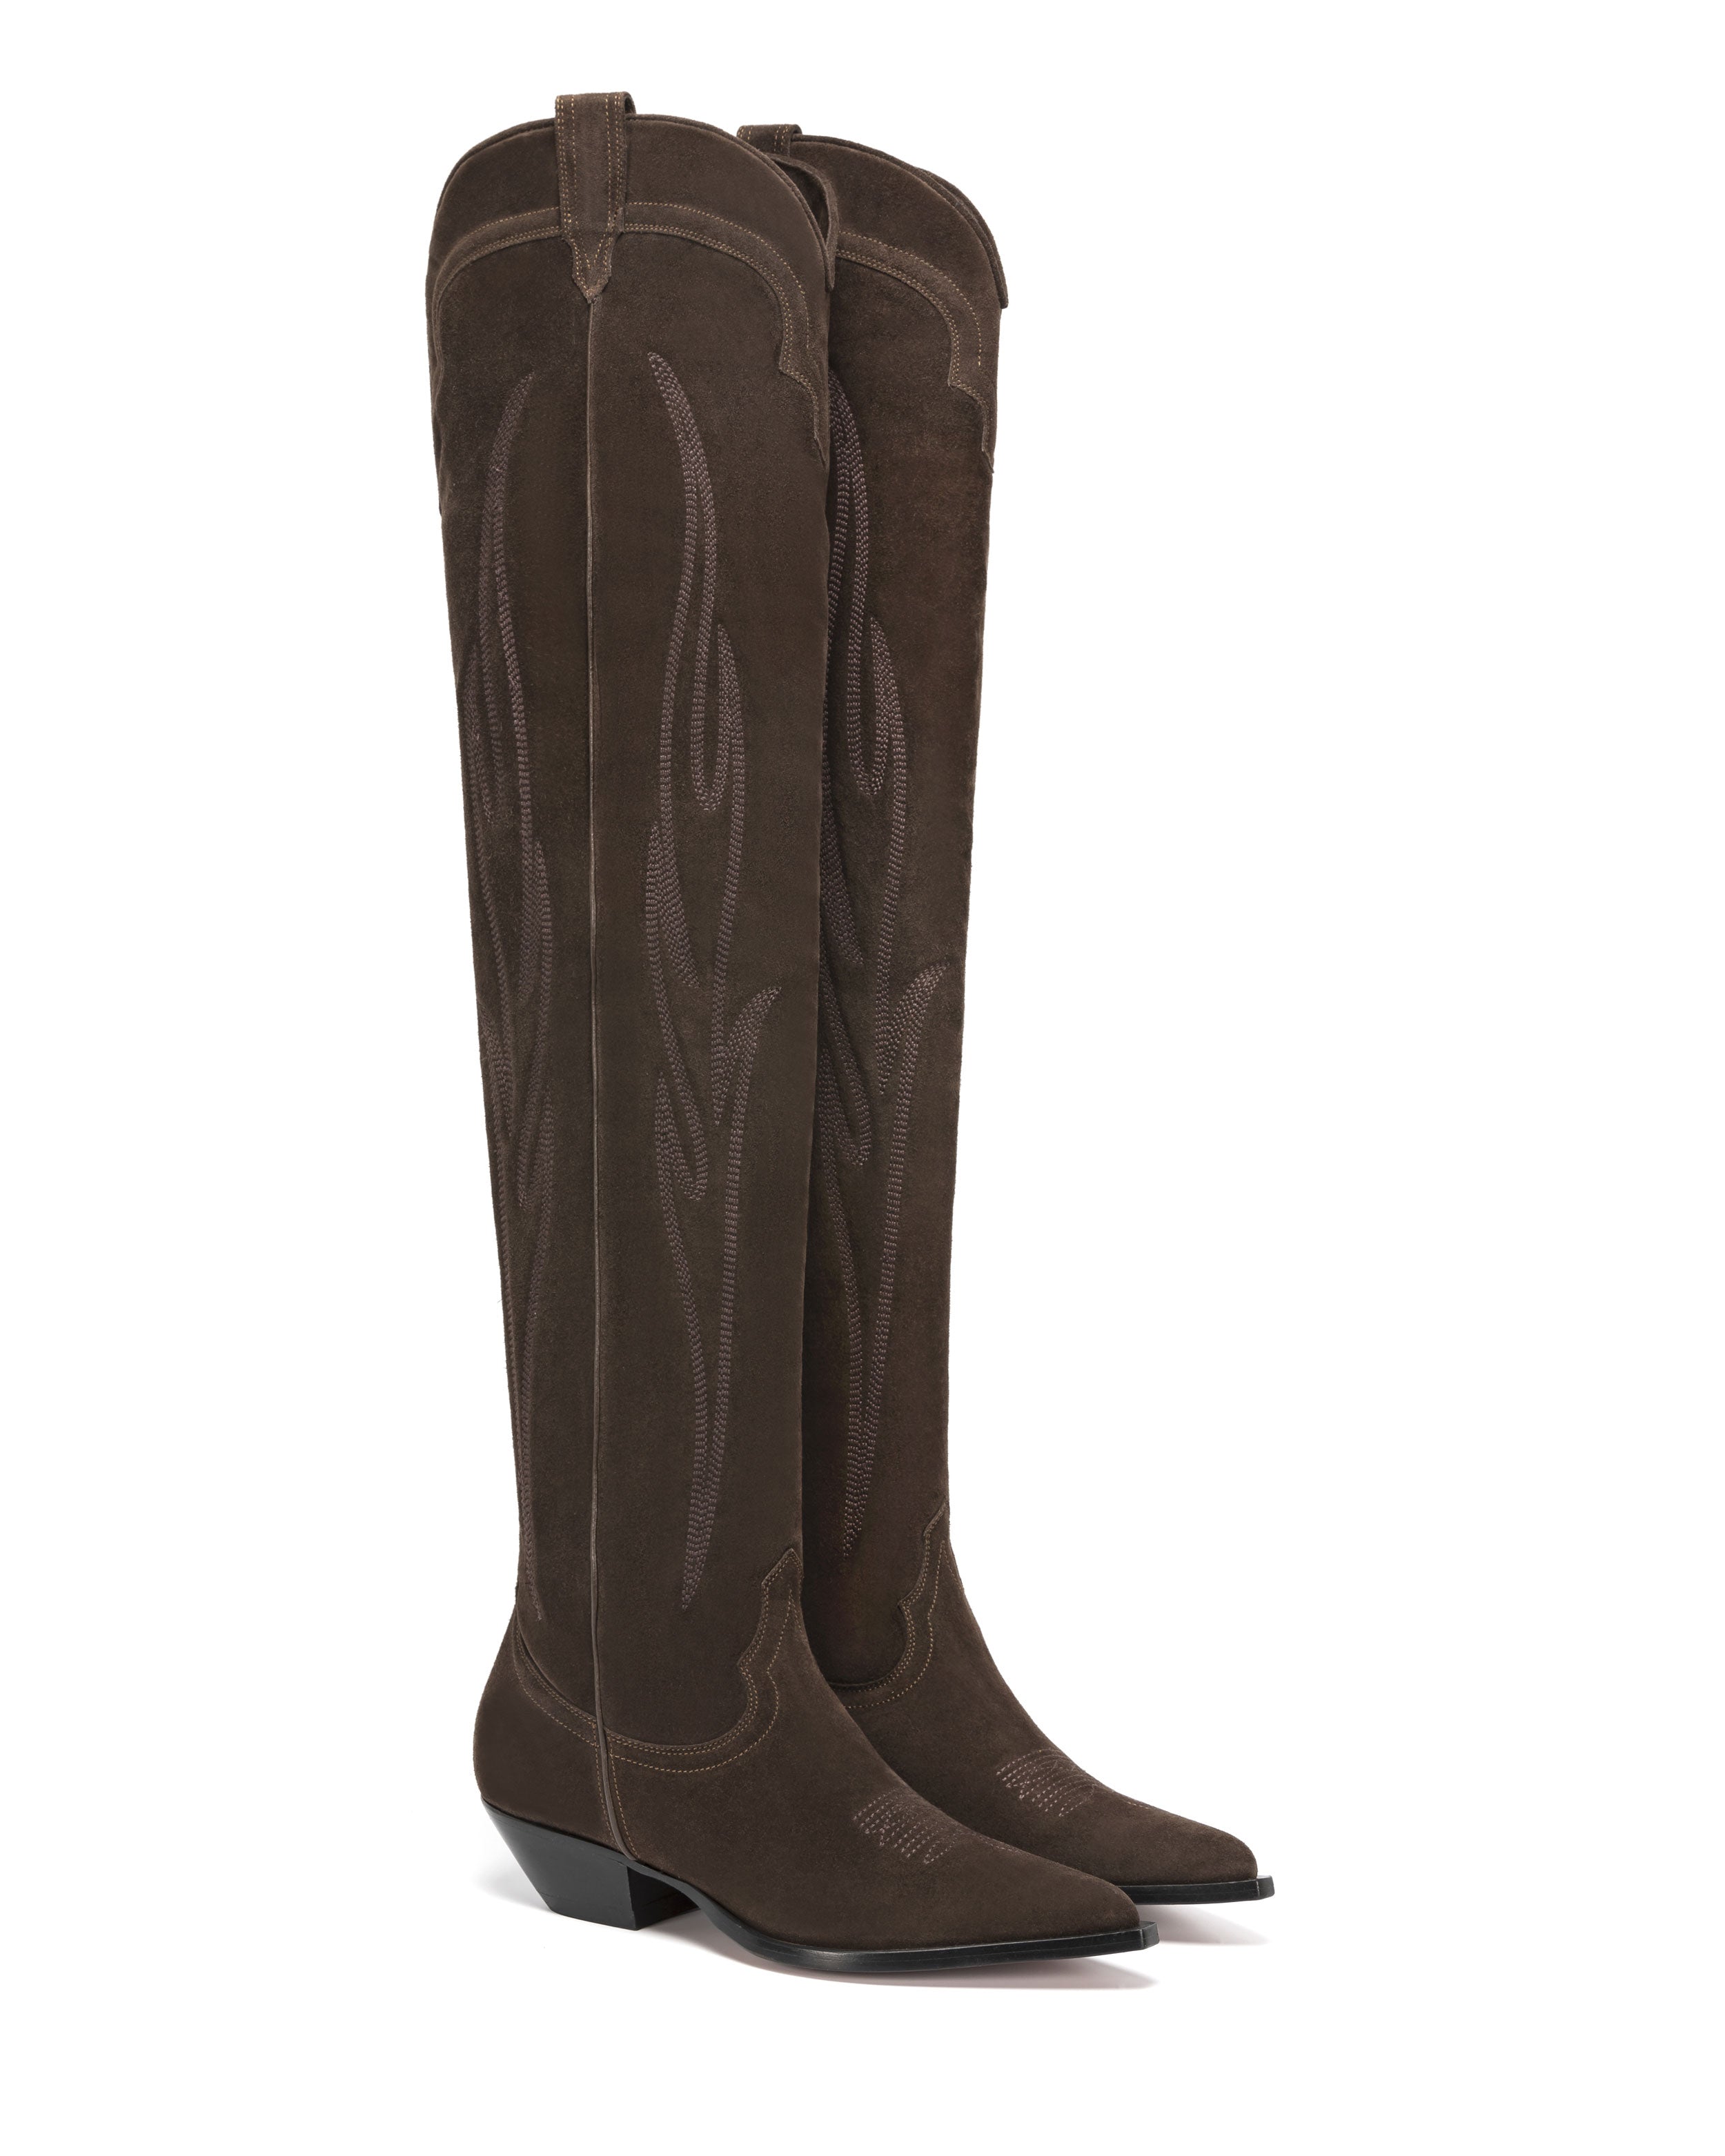 <strong>HERMOSA</strong><br> Women's Over The Knee Boots in Brown Suede | On Tone Embroidery 02